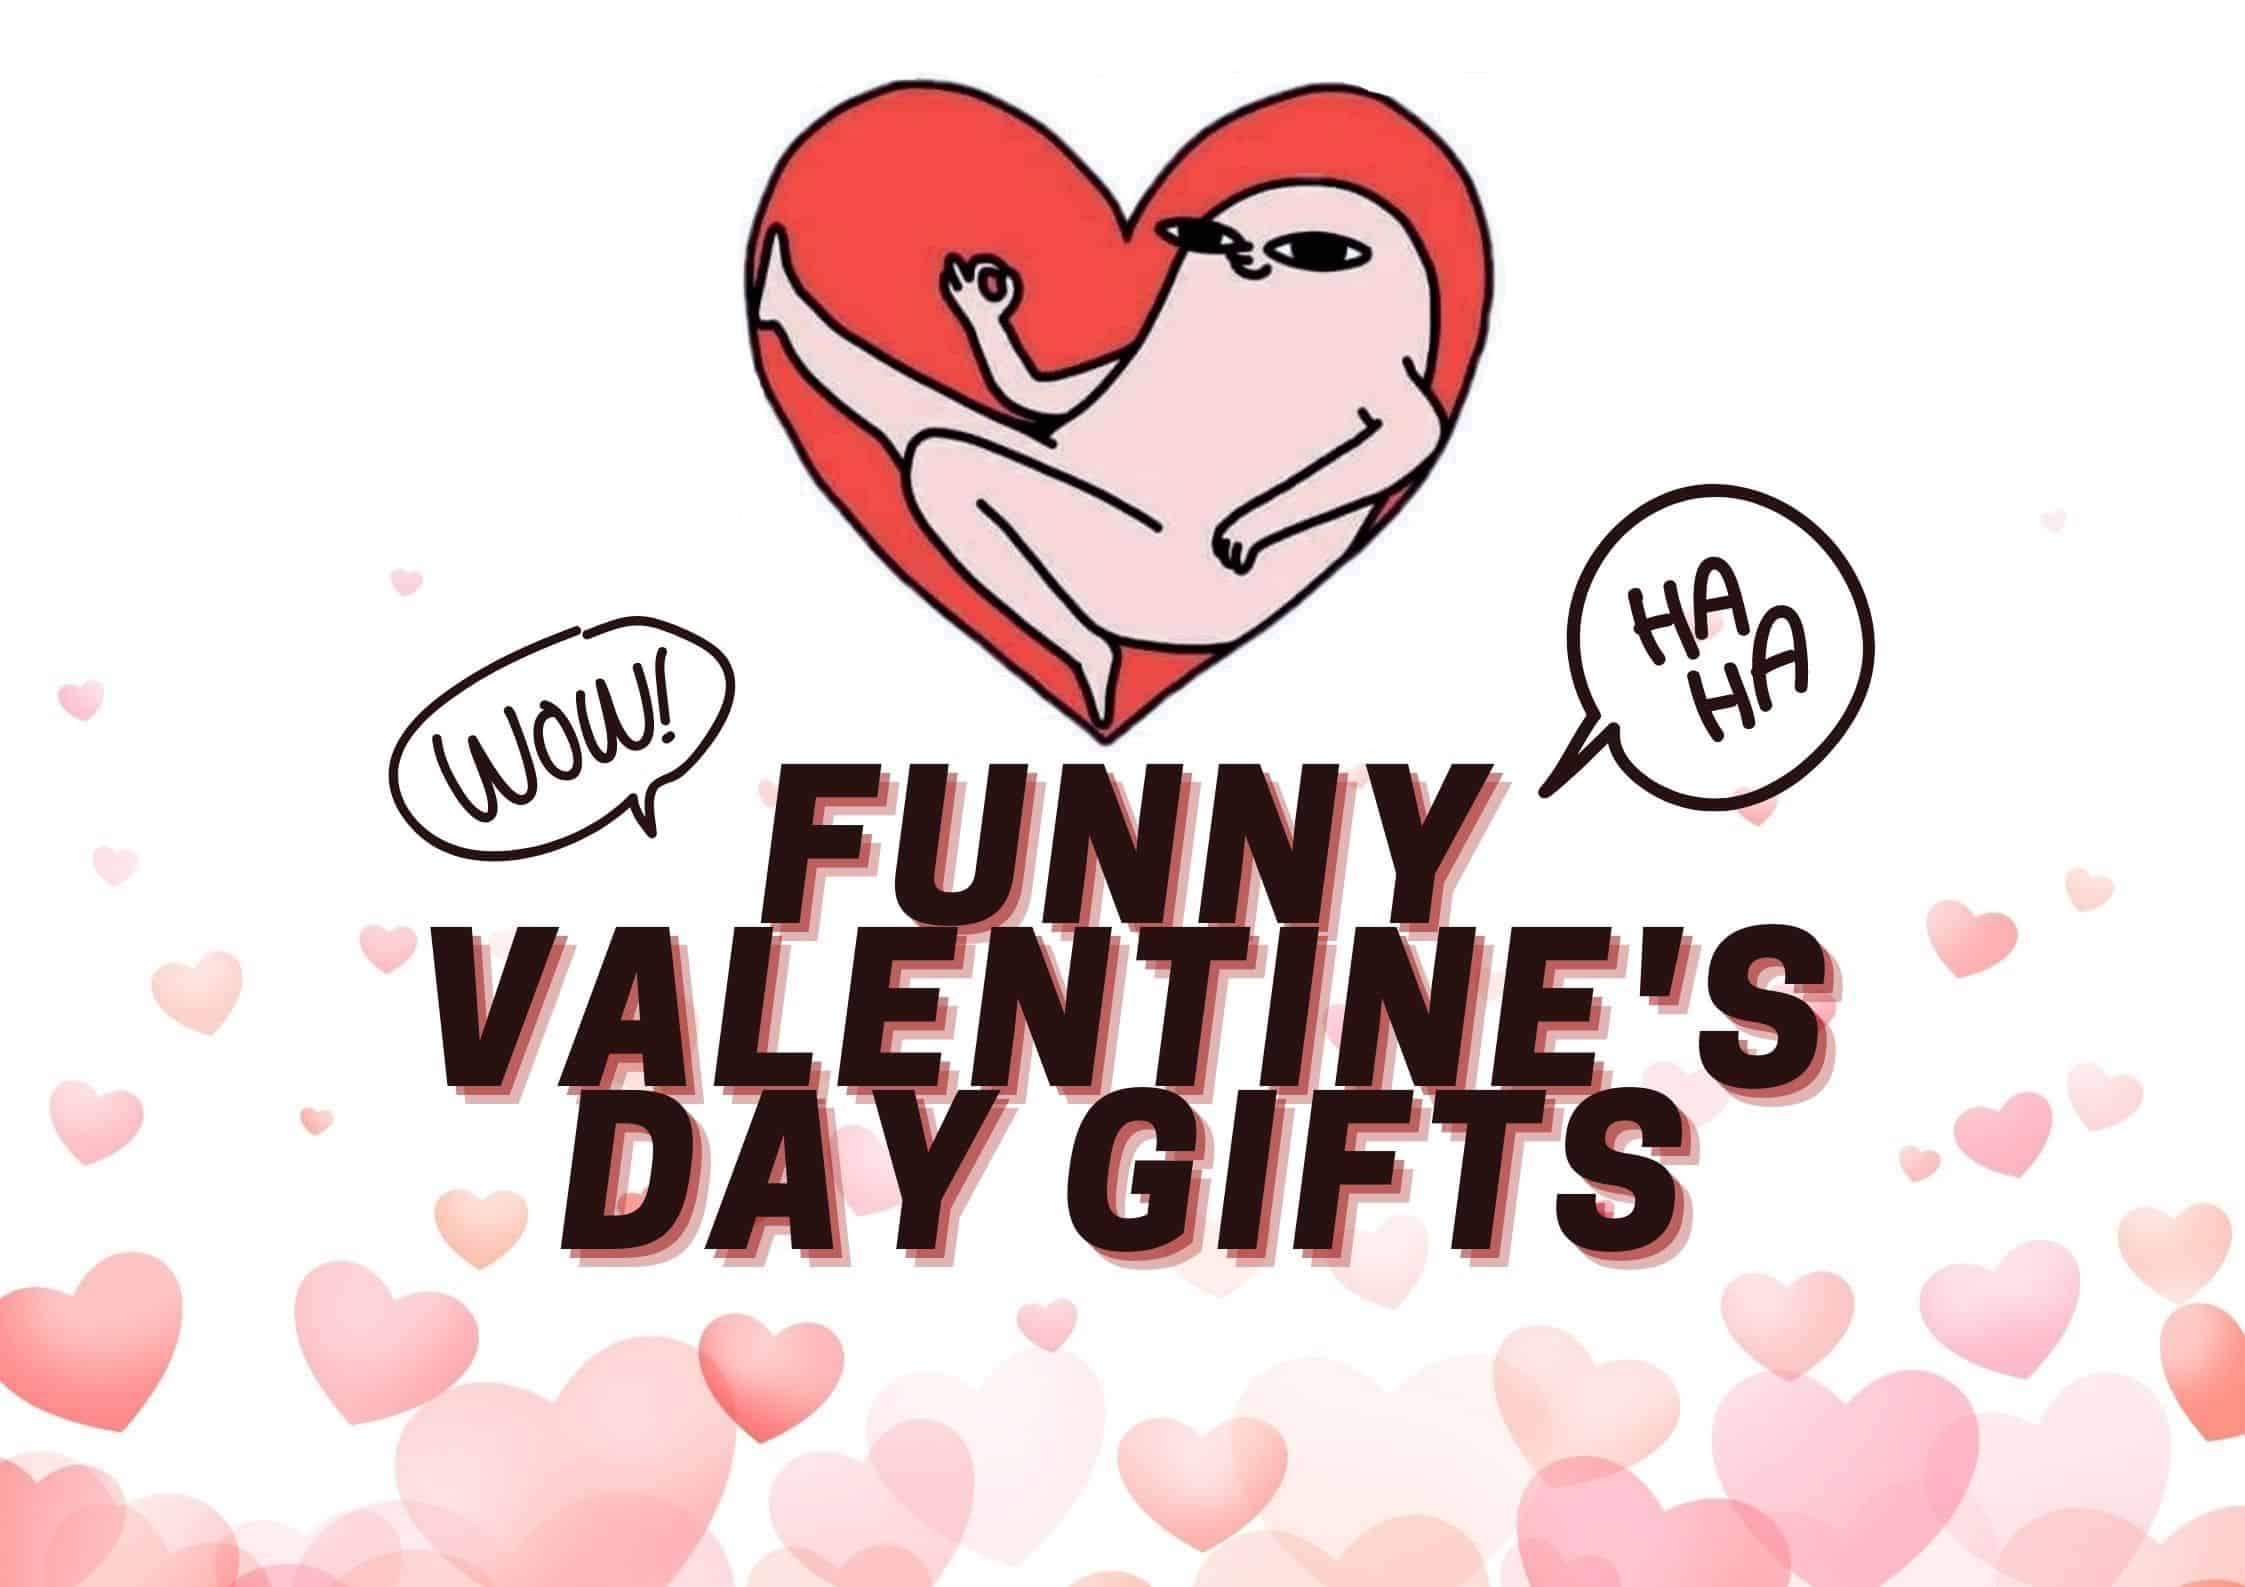 5 ideas on how to present your gifts this Valentines Day  Wrap it By Tina